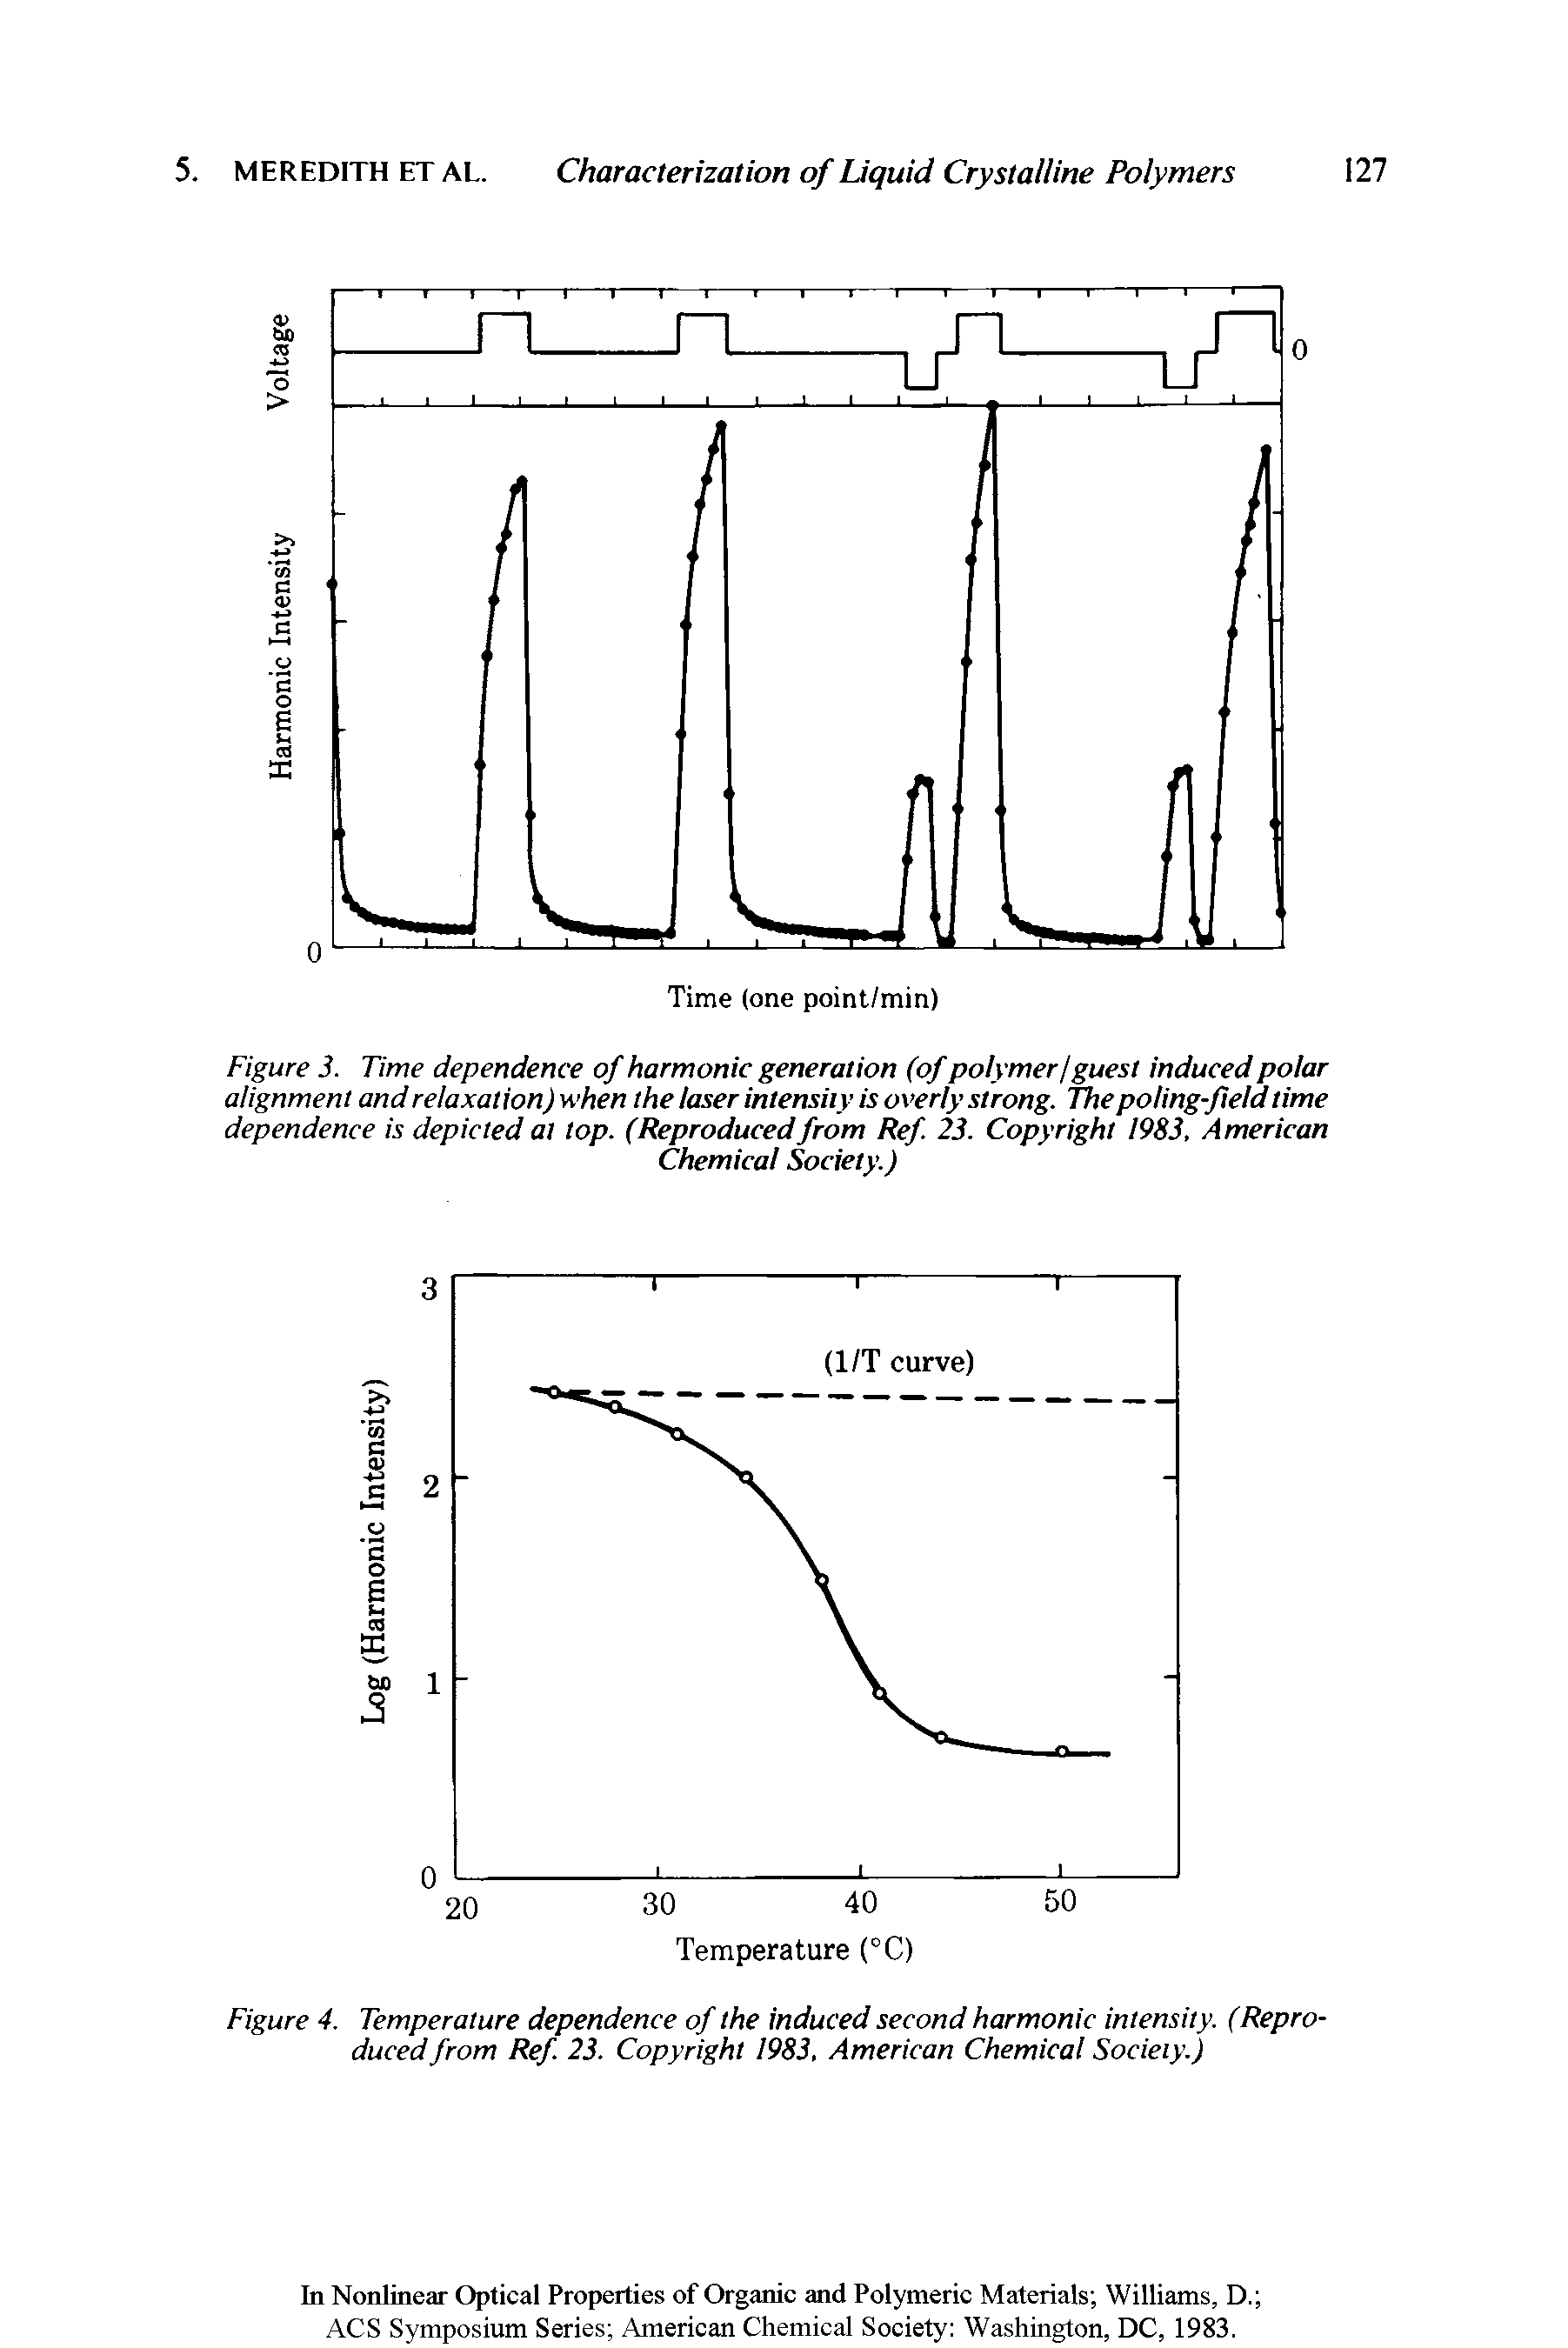 Figure 3. Time dependence of harmonic generation (of polymer/guest induced polar alignment and relaxation) when the laser intensity is overly strong. The poling-field time dependence is depicted at top. (Reproducedfrom Ref. 23. Copyright 1983, American...